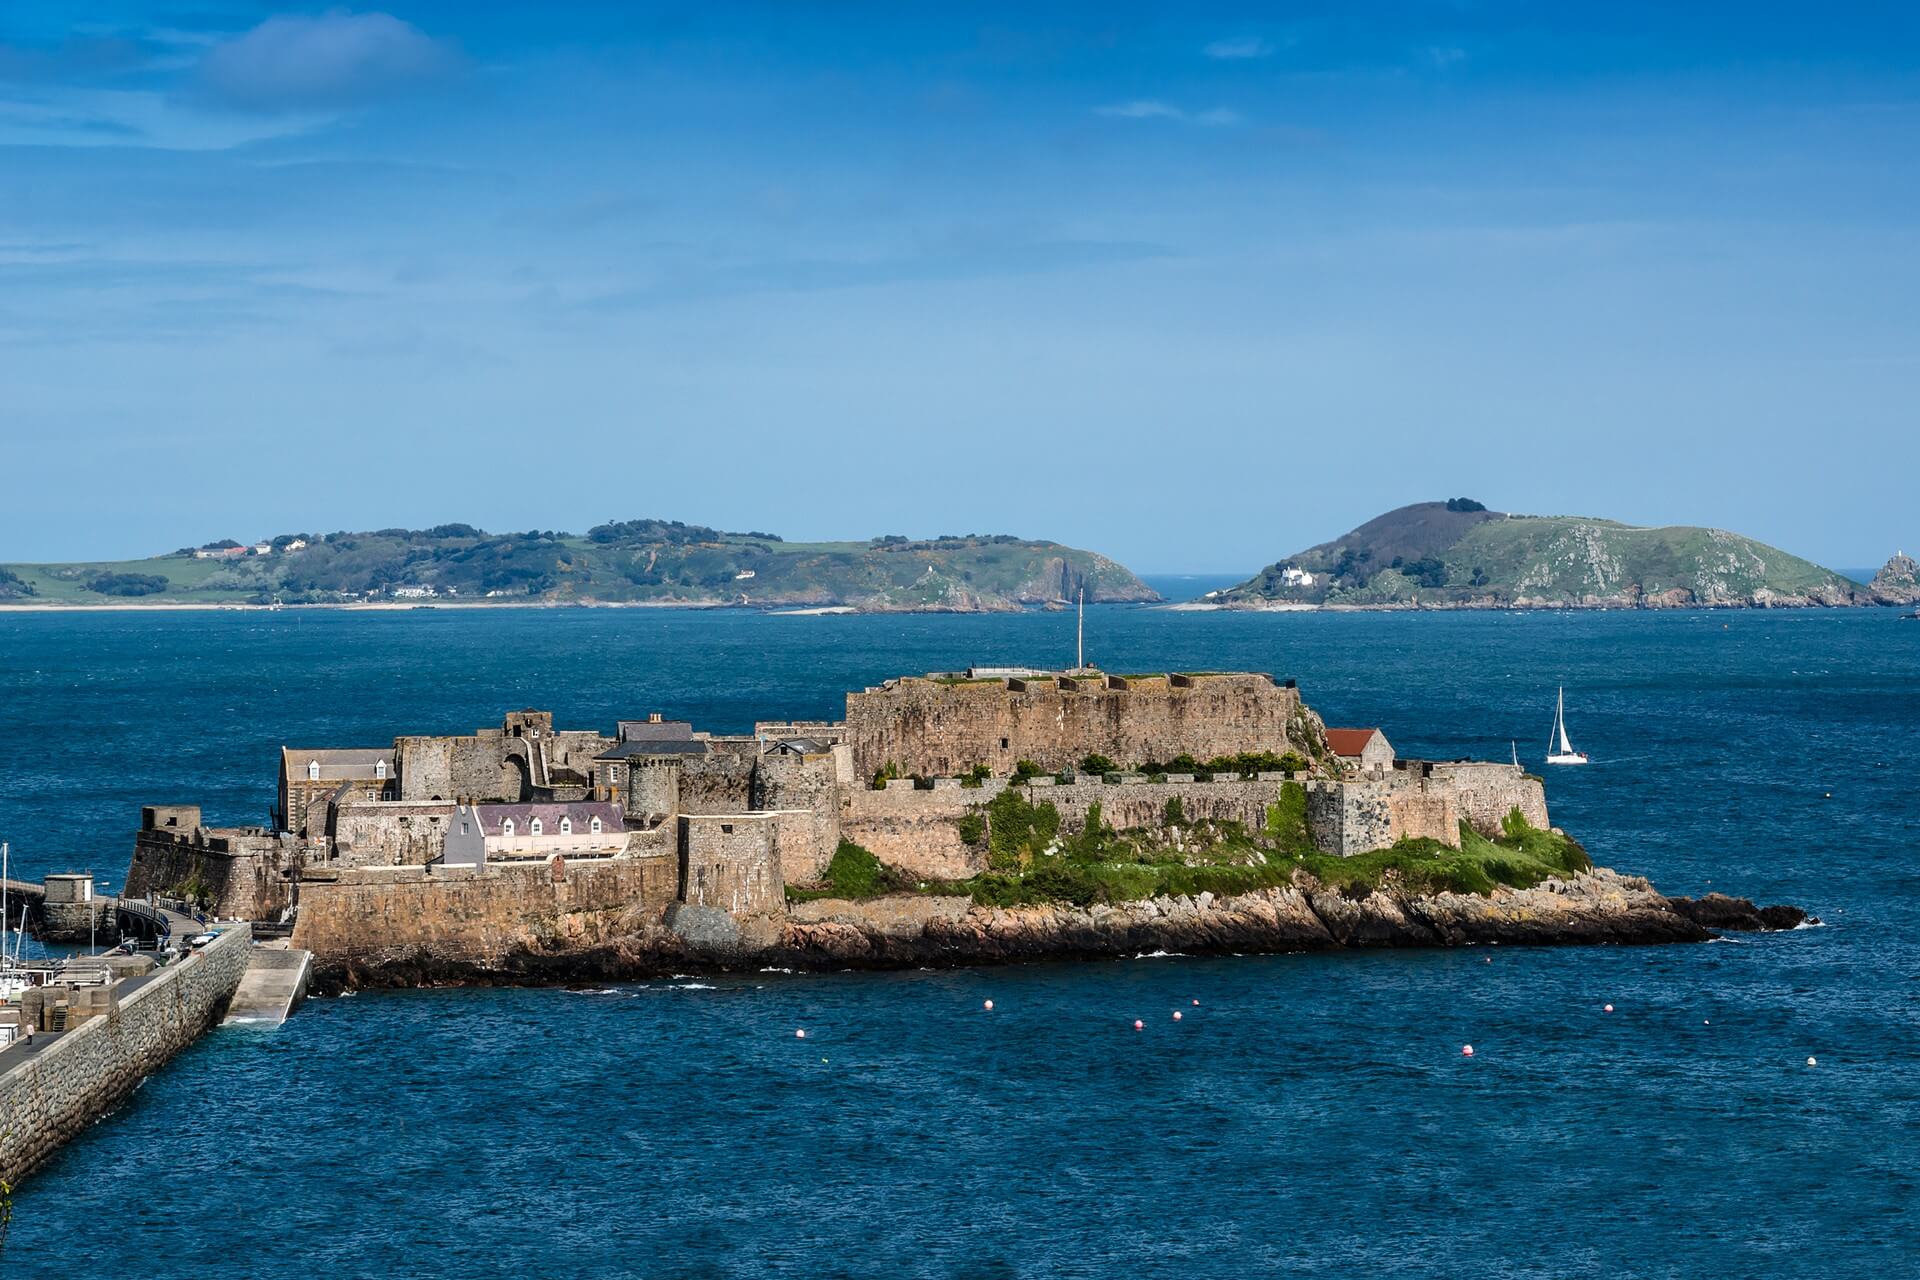 Castle Cornet has guarded Saint Peter Port for 800 years. Saint Peter Port - capital of Guernsey - British Crown dependency in English Channel off the coast of Normandy. View from English Channel.
